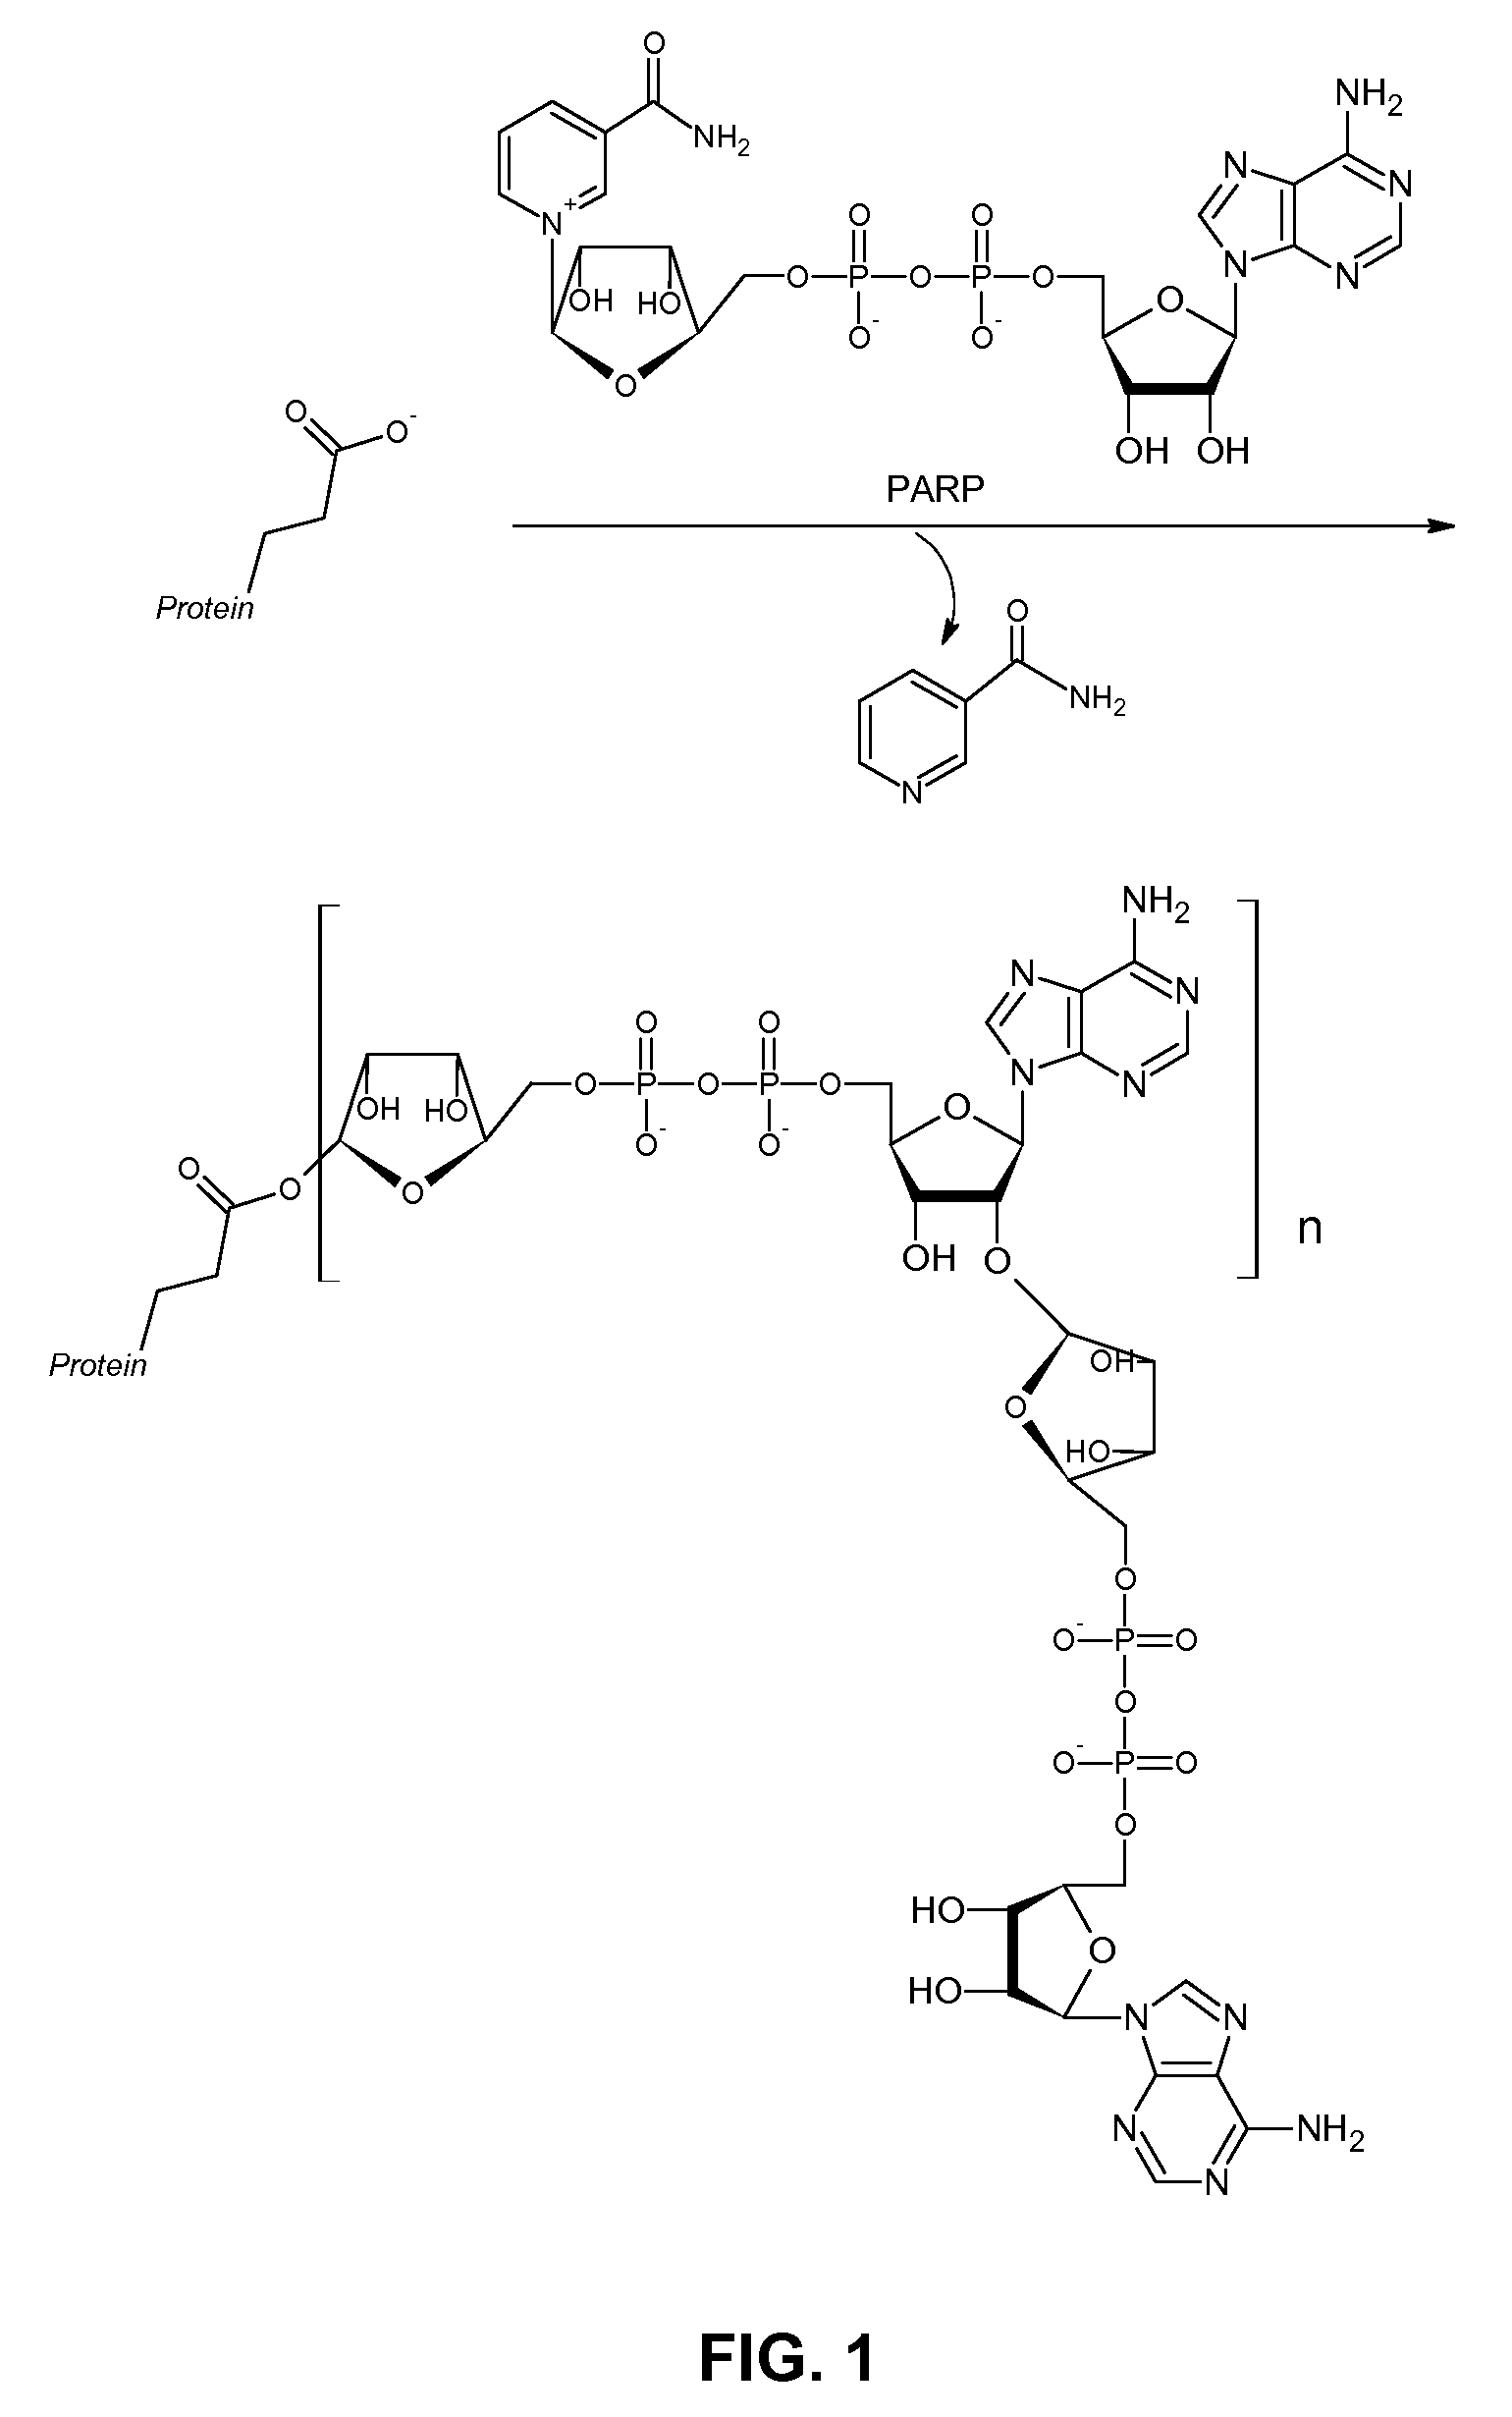 Colorimetric Substrate and Methods for Detecting Poly(ADP-ribose) Polymerase Activity including PARP Enzymes PARP-1, VPARP, and Tankyrase-1